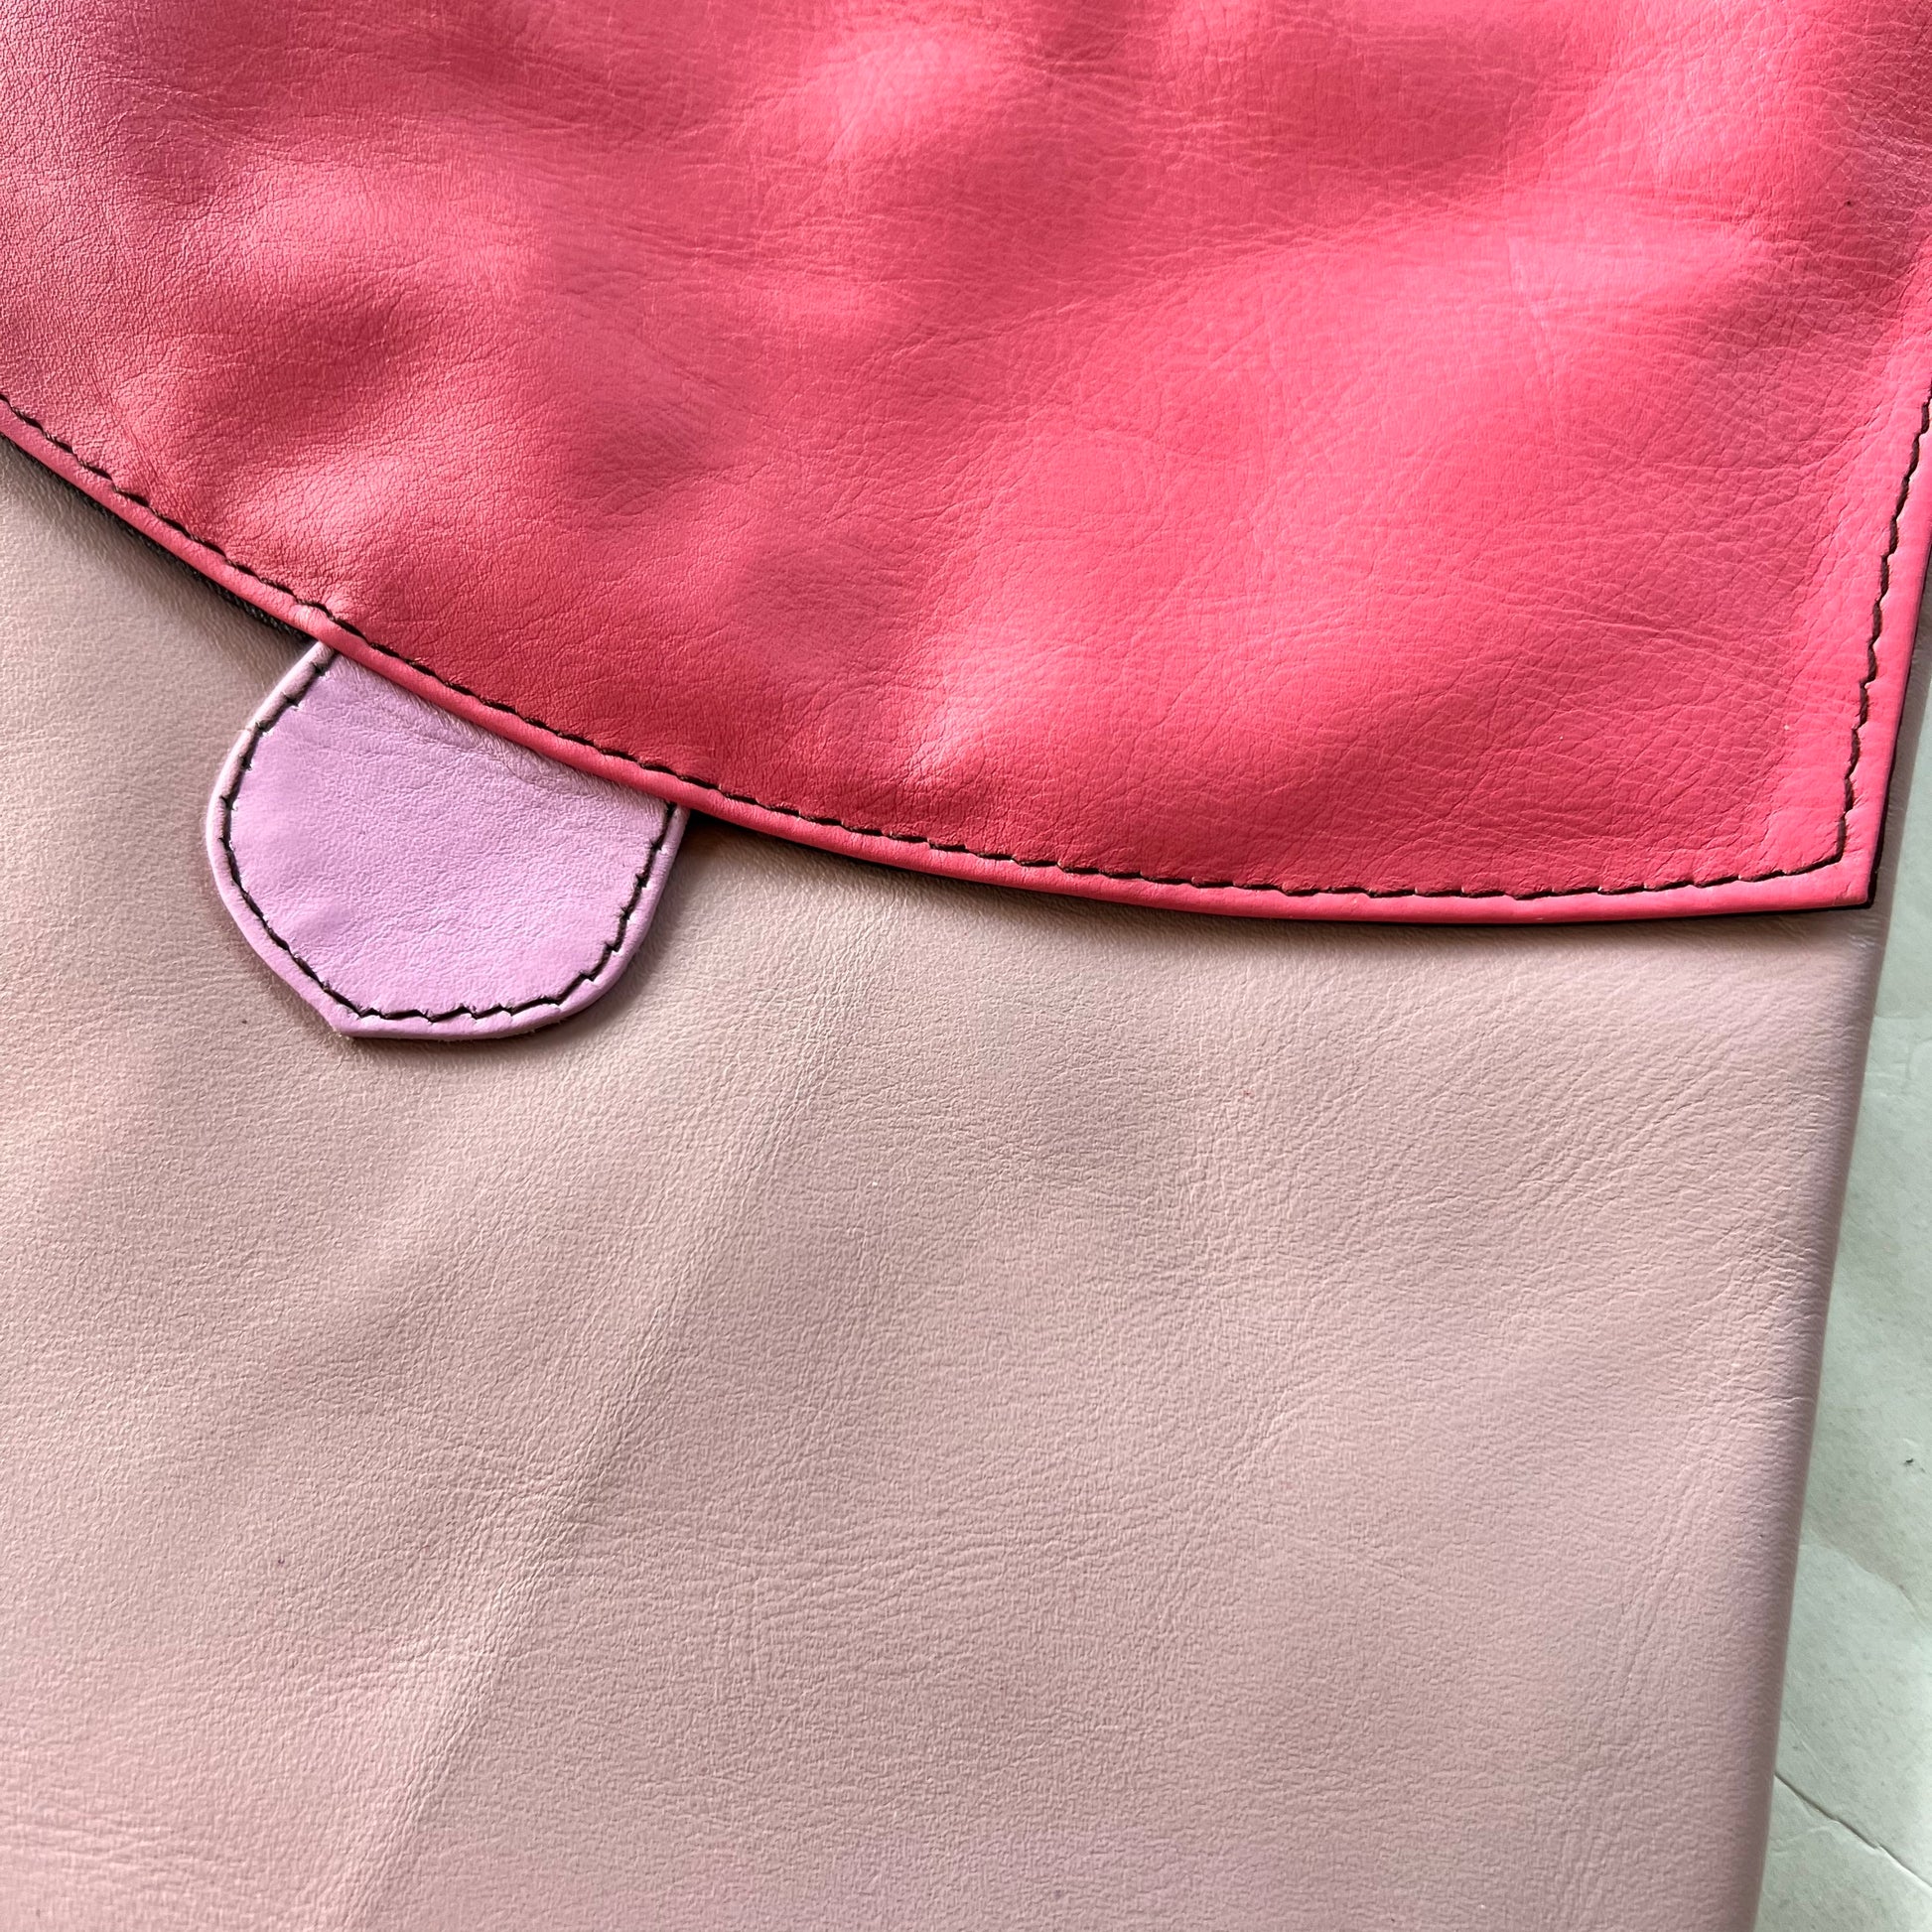 close-up of greta bag with pink flap over lilac body.